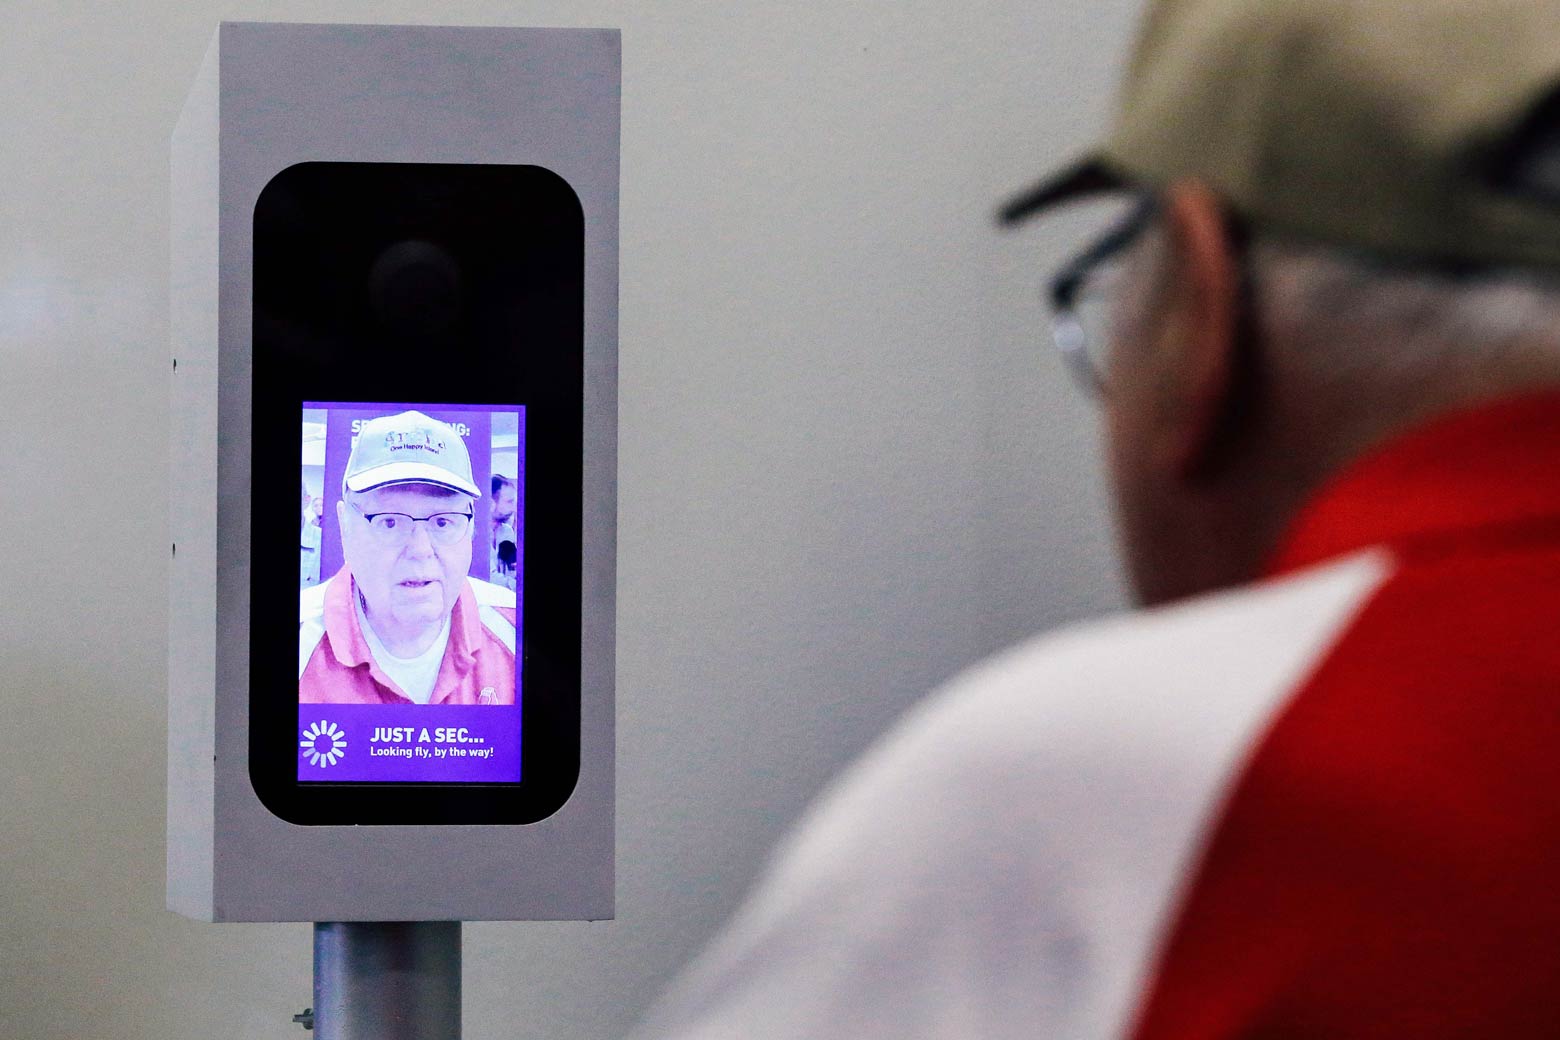 A man in a baseball cap and glasses looks into a screen on which an image of his face has been captured.